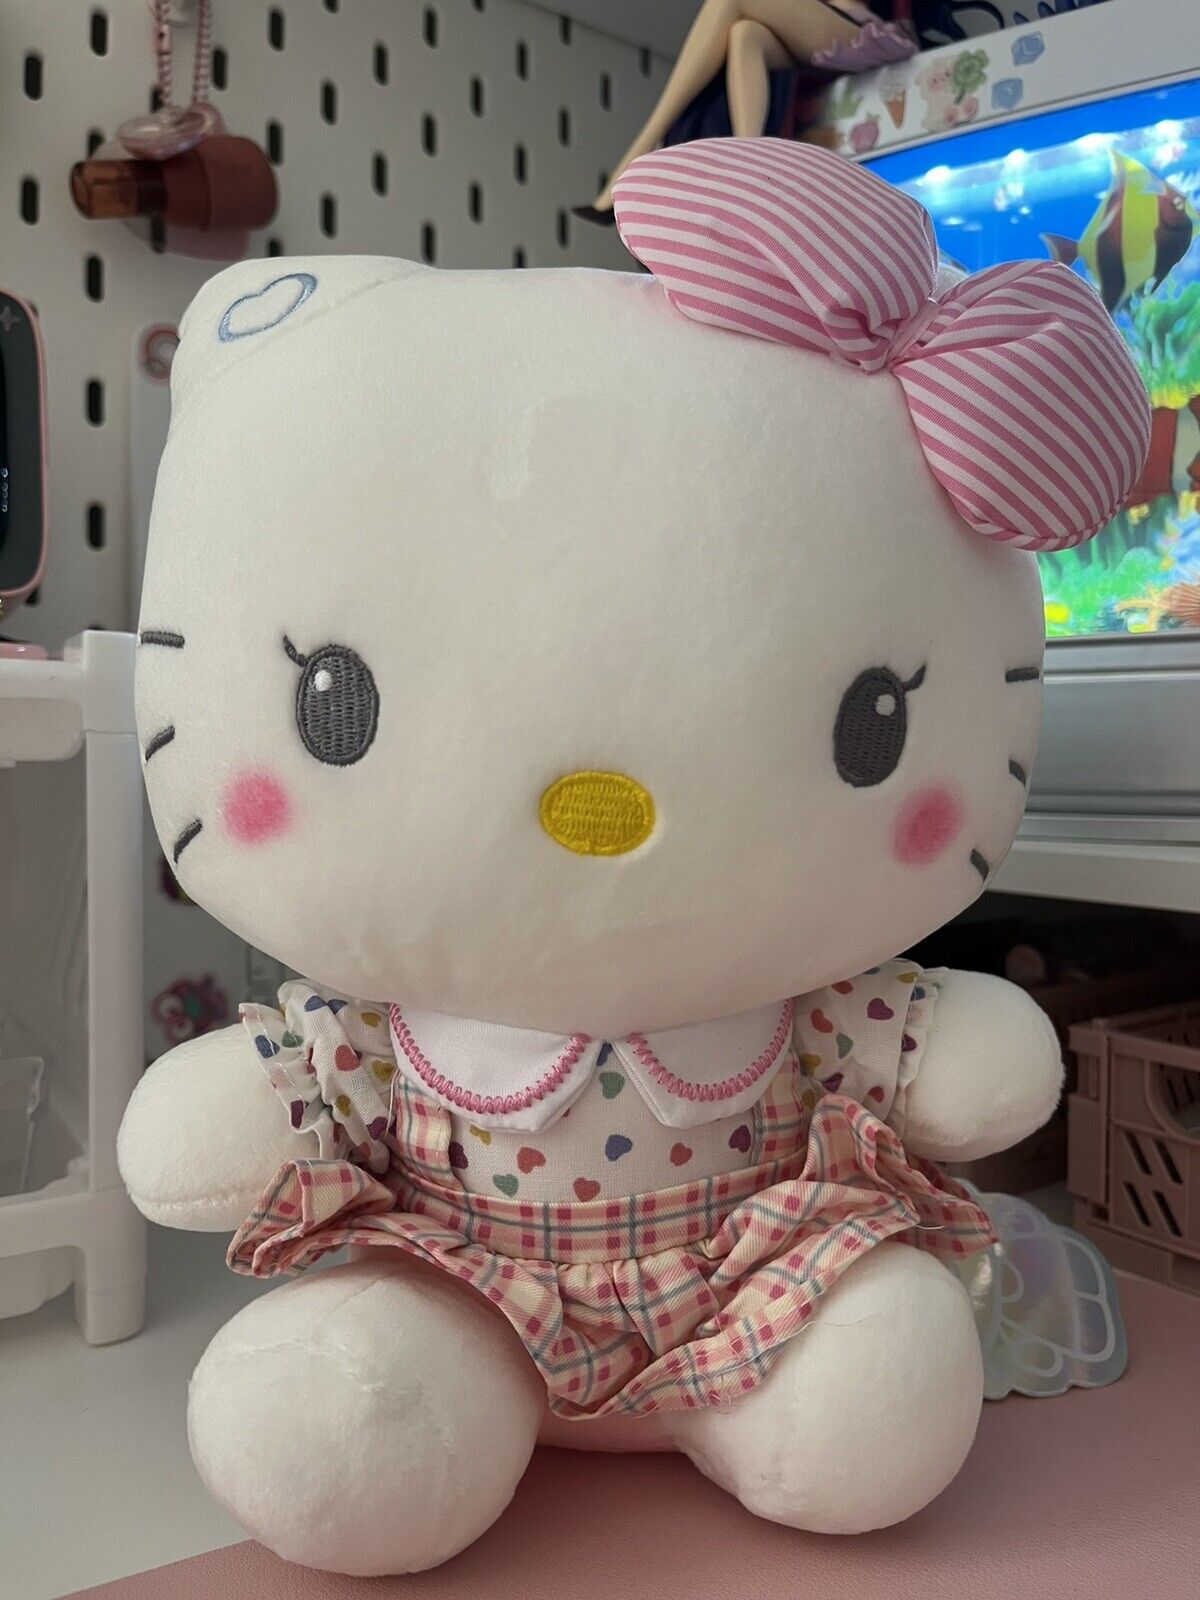 New Sanrio Hello Kitty With Romantic Outfit Plush 8”